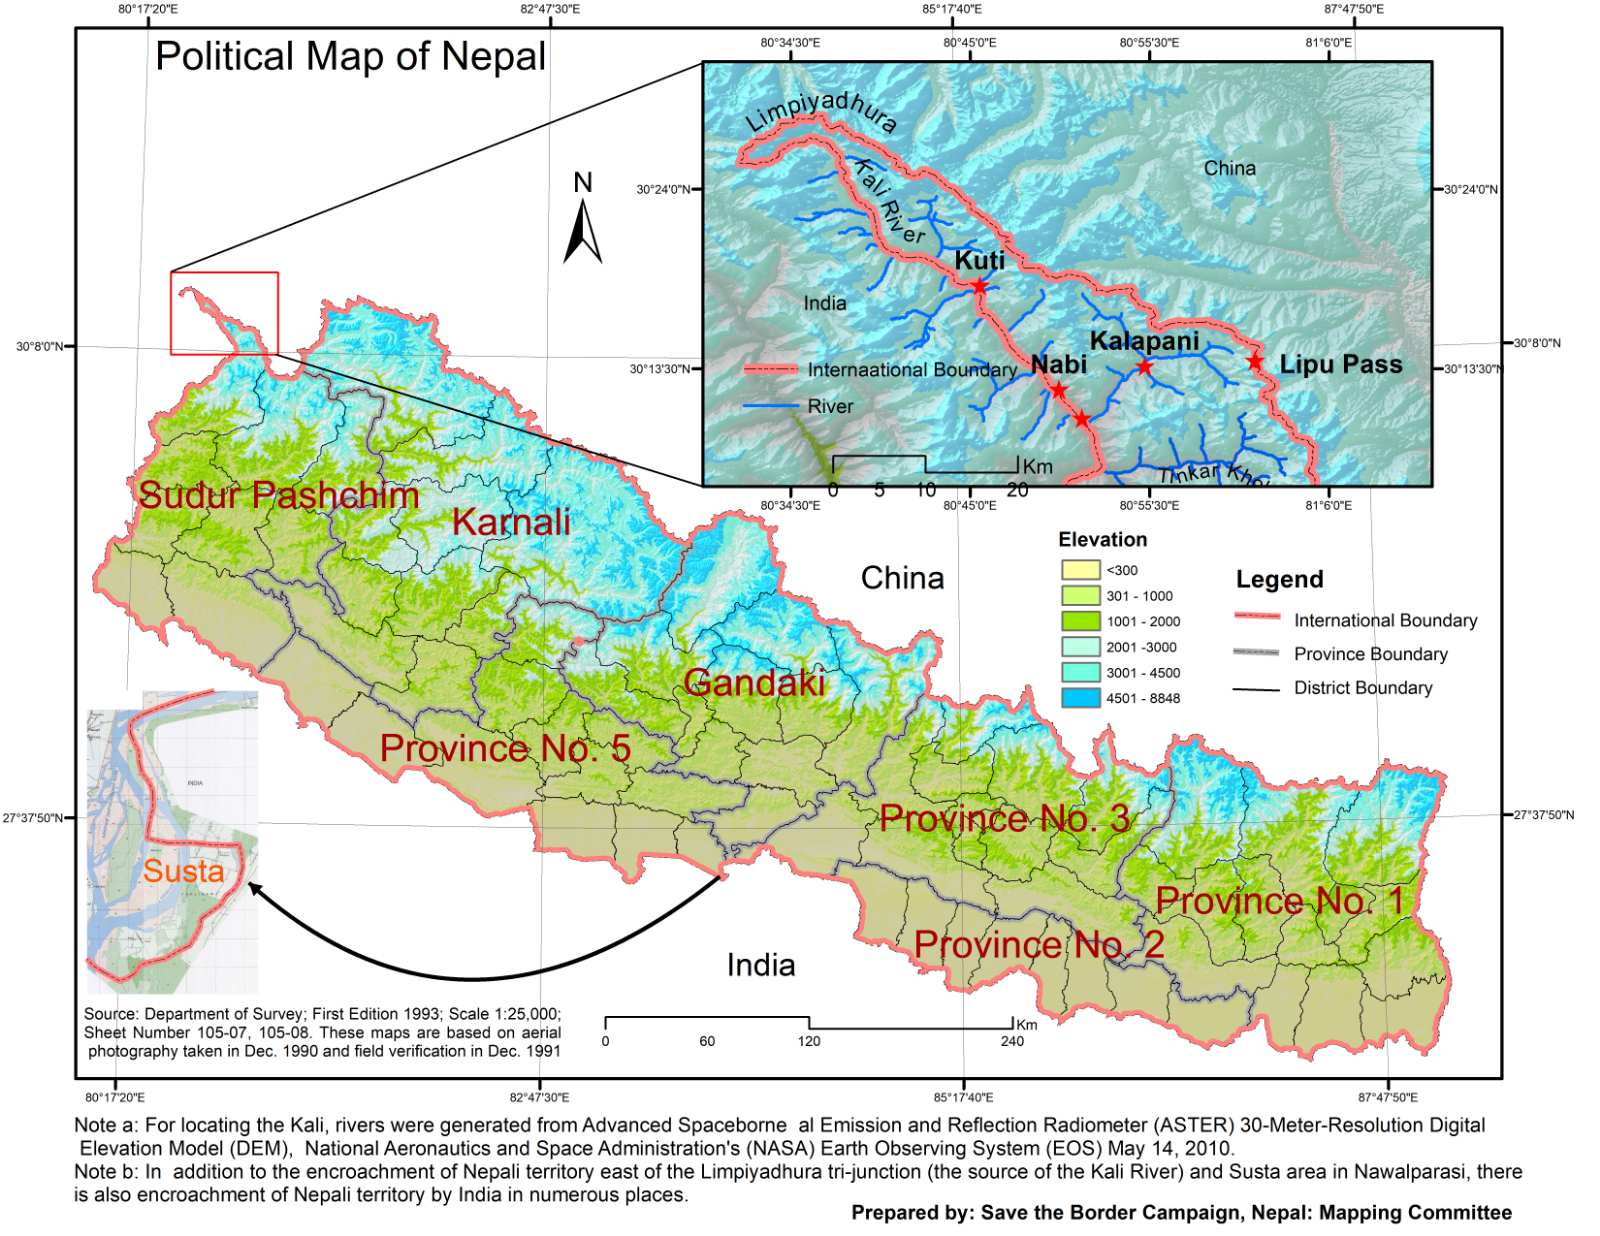 Covid 19, Kalapani and KP Oli Government: Nepal’s Foreign Policy and Diplomacy with Neighbors